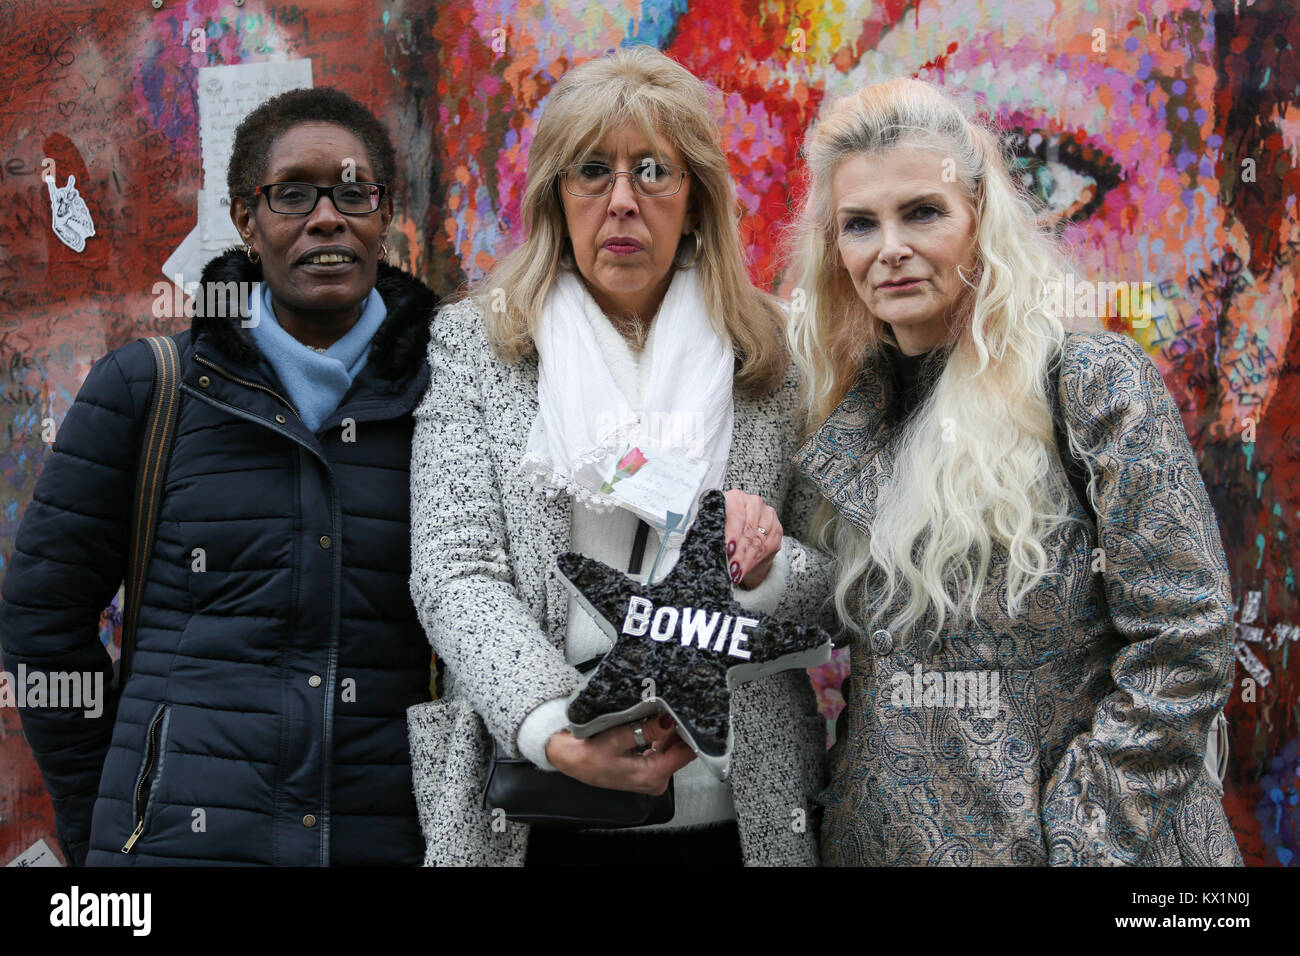 6th Jan, 2018. David Bowie fans meet up at the Bowie Brixton Memorial to  remember the